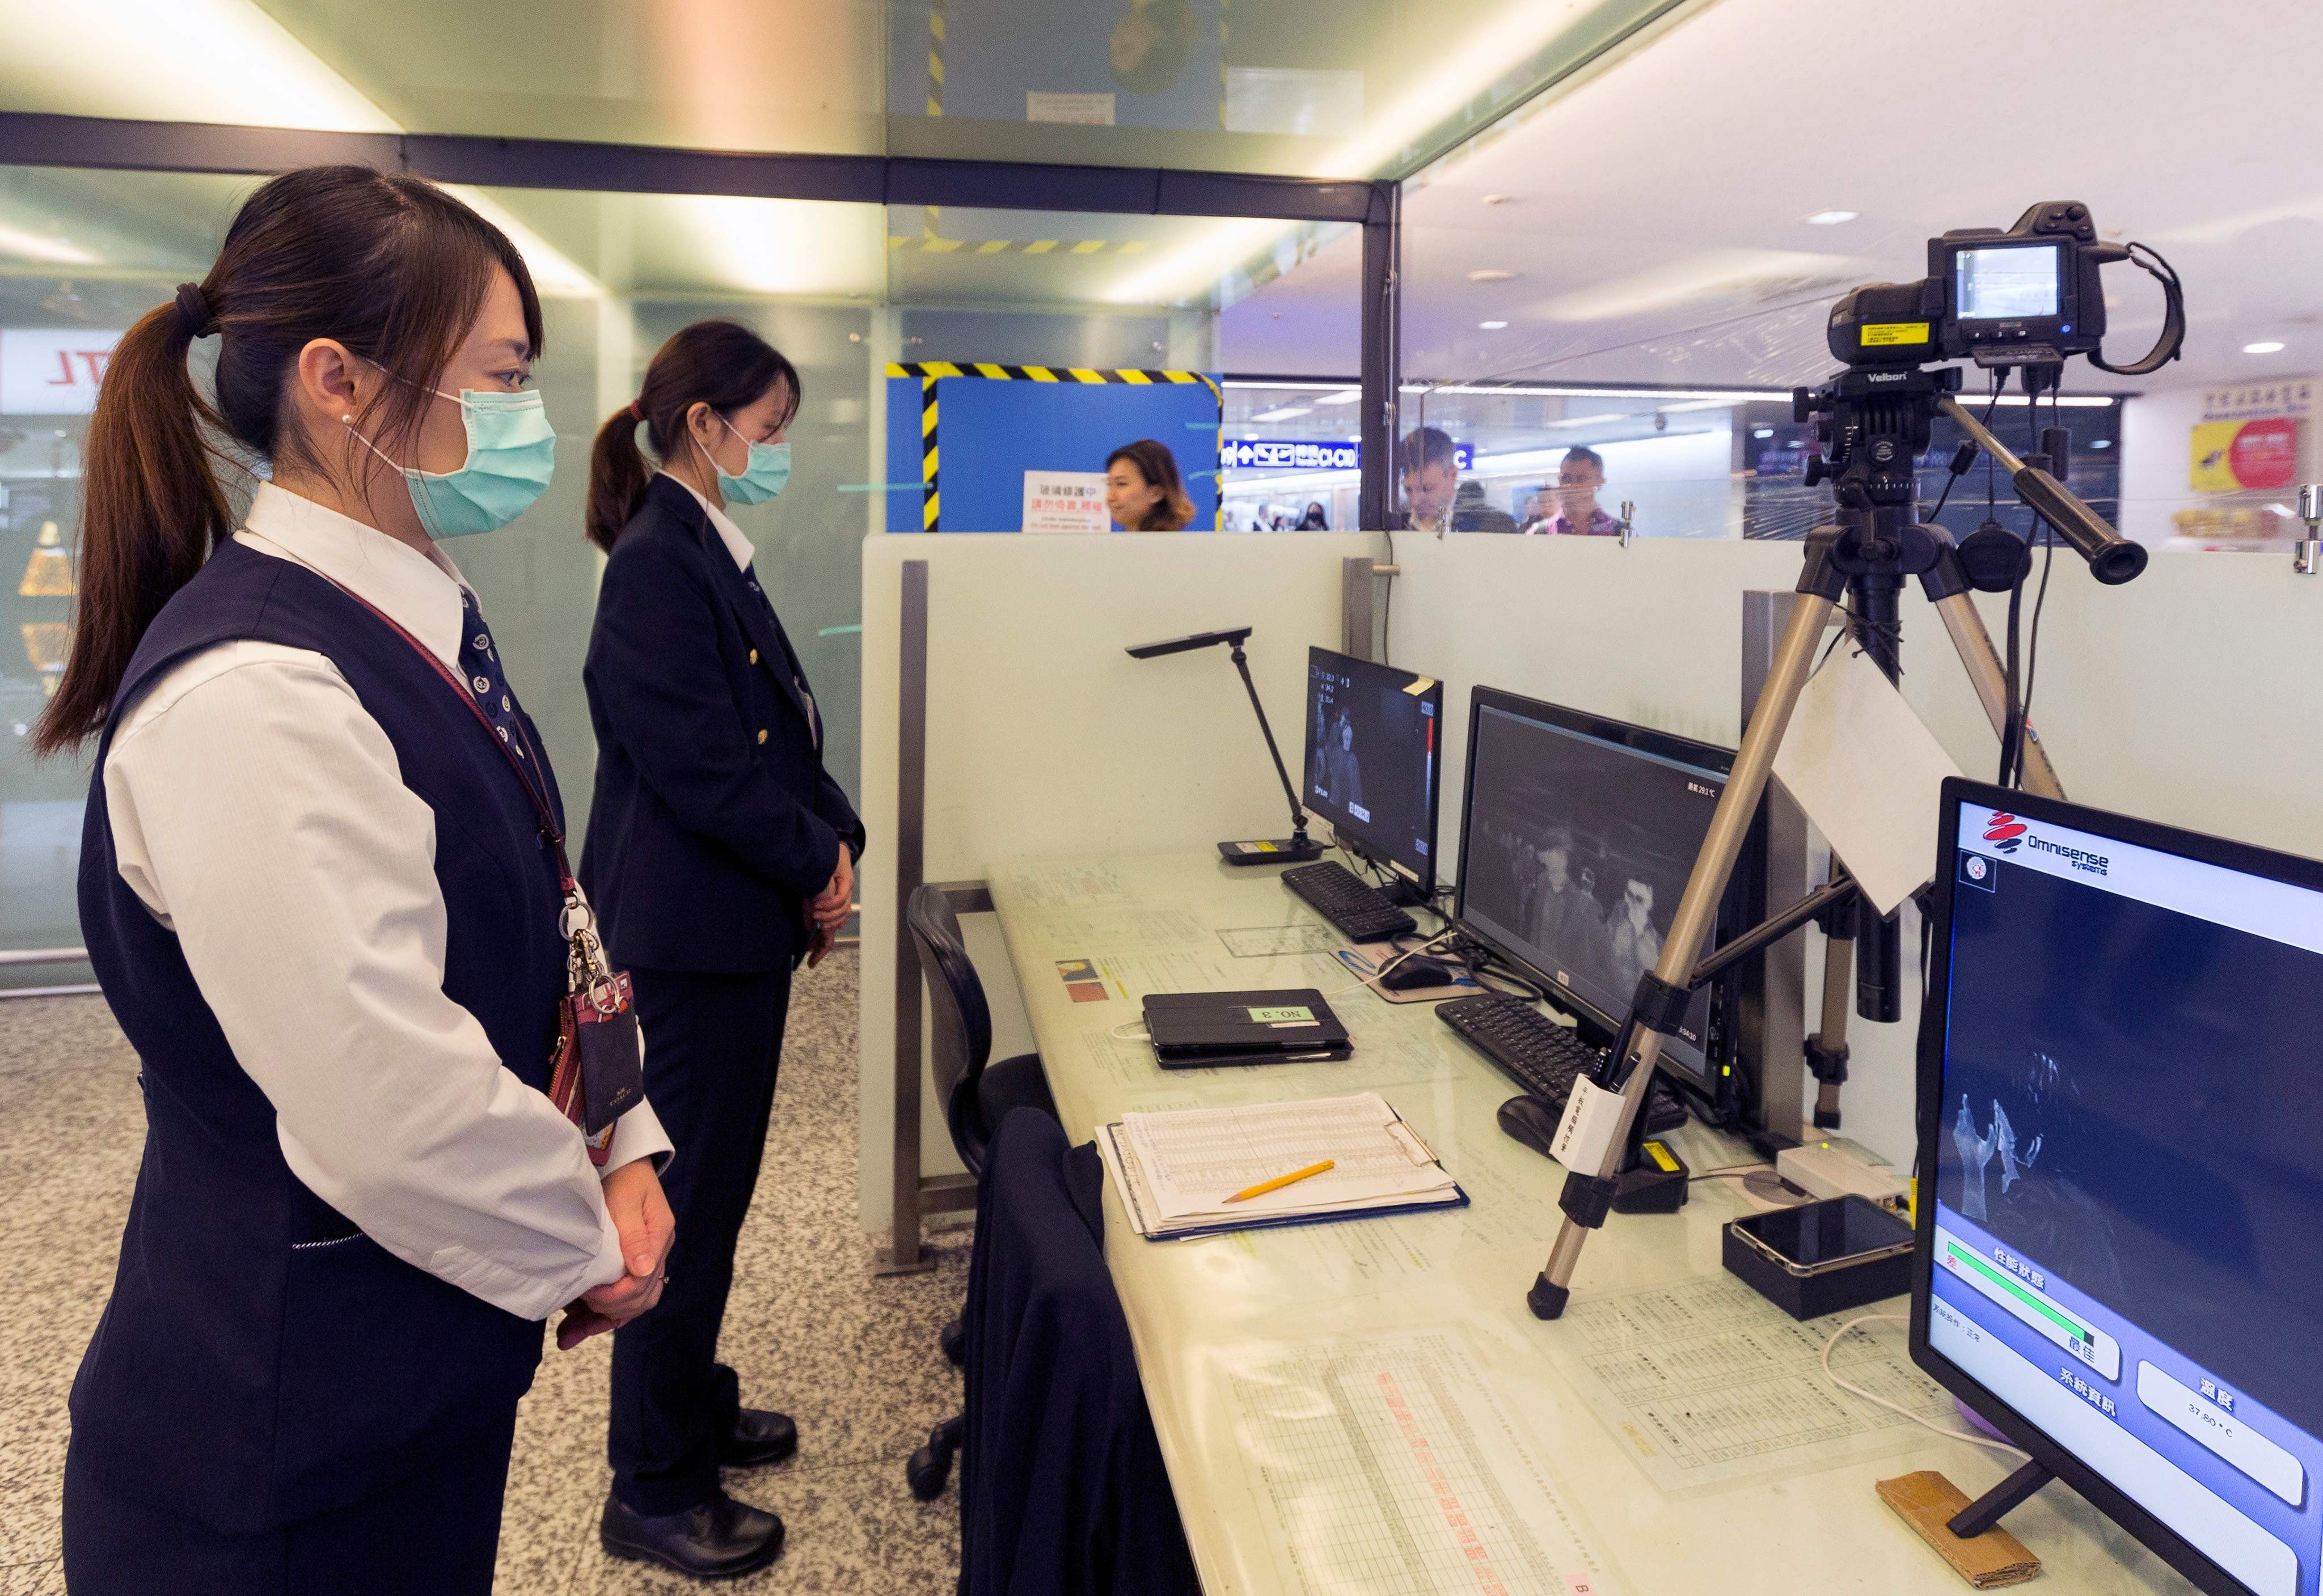 Staff from Taiwan's Centre for Disease Control use thermal scanners to screen passengers arriving on a flight from Wuhan. Photo: AFP